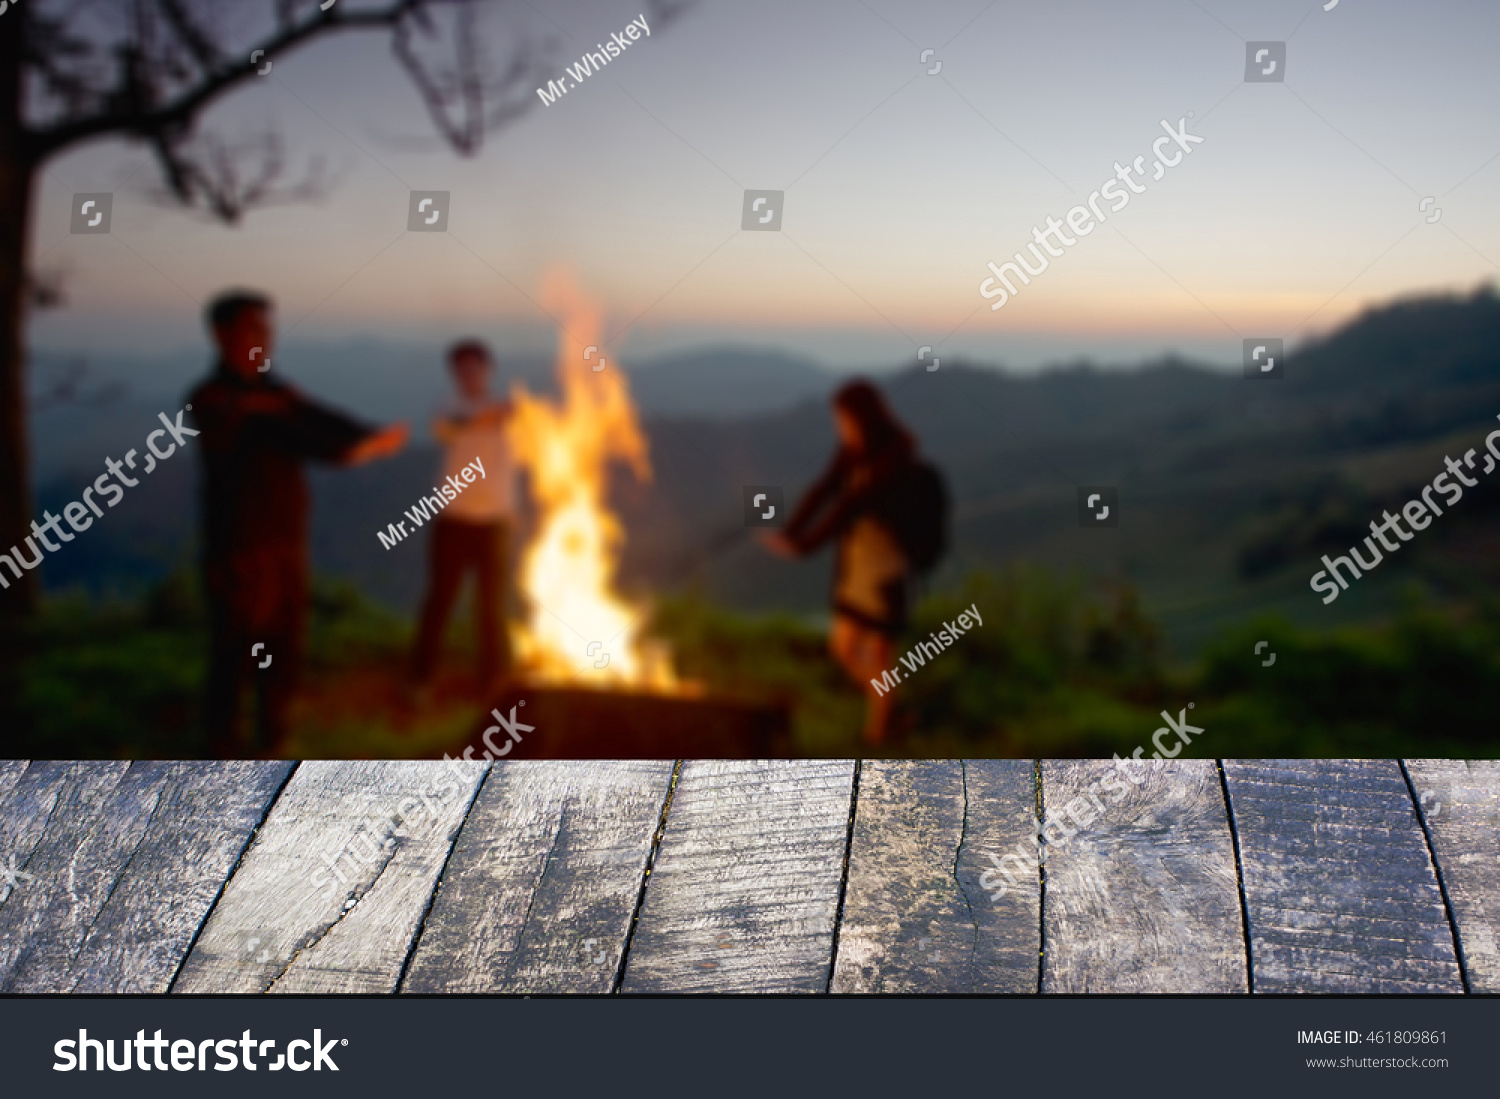 Dark wood desk space and night camping in forest background. #461809861